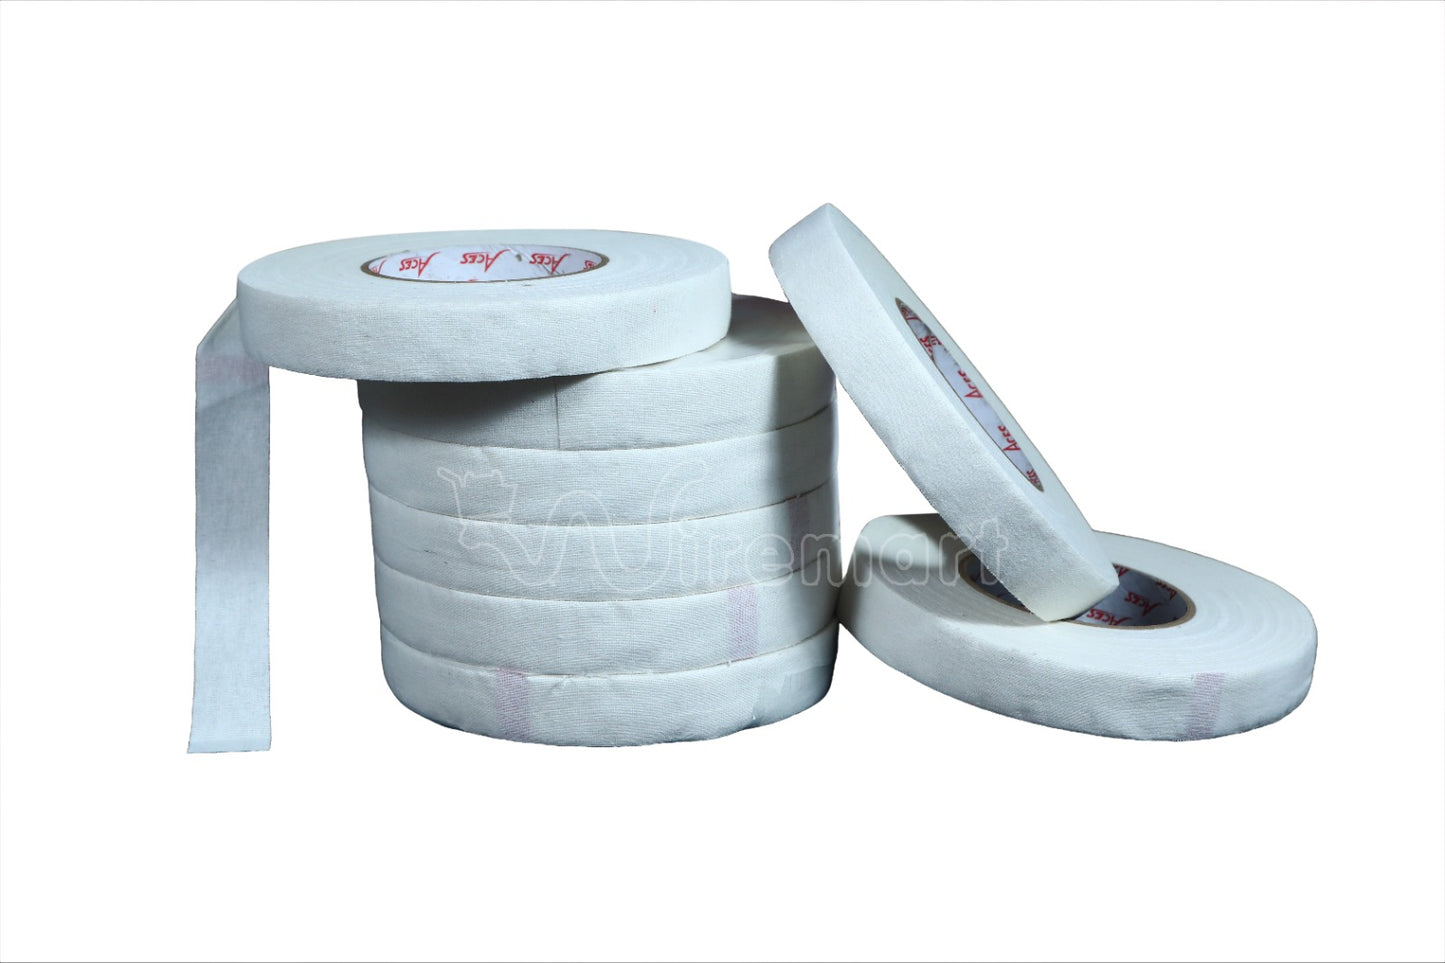 Aces Cotton Adhesive Tape